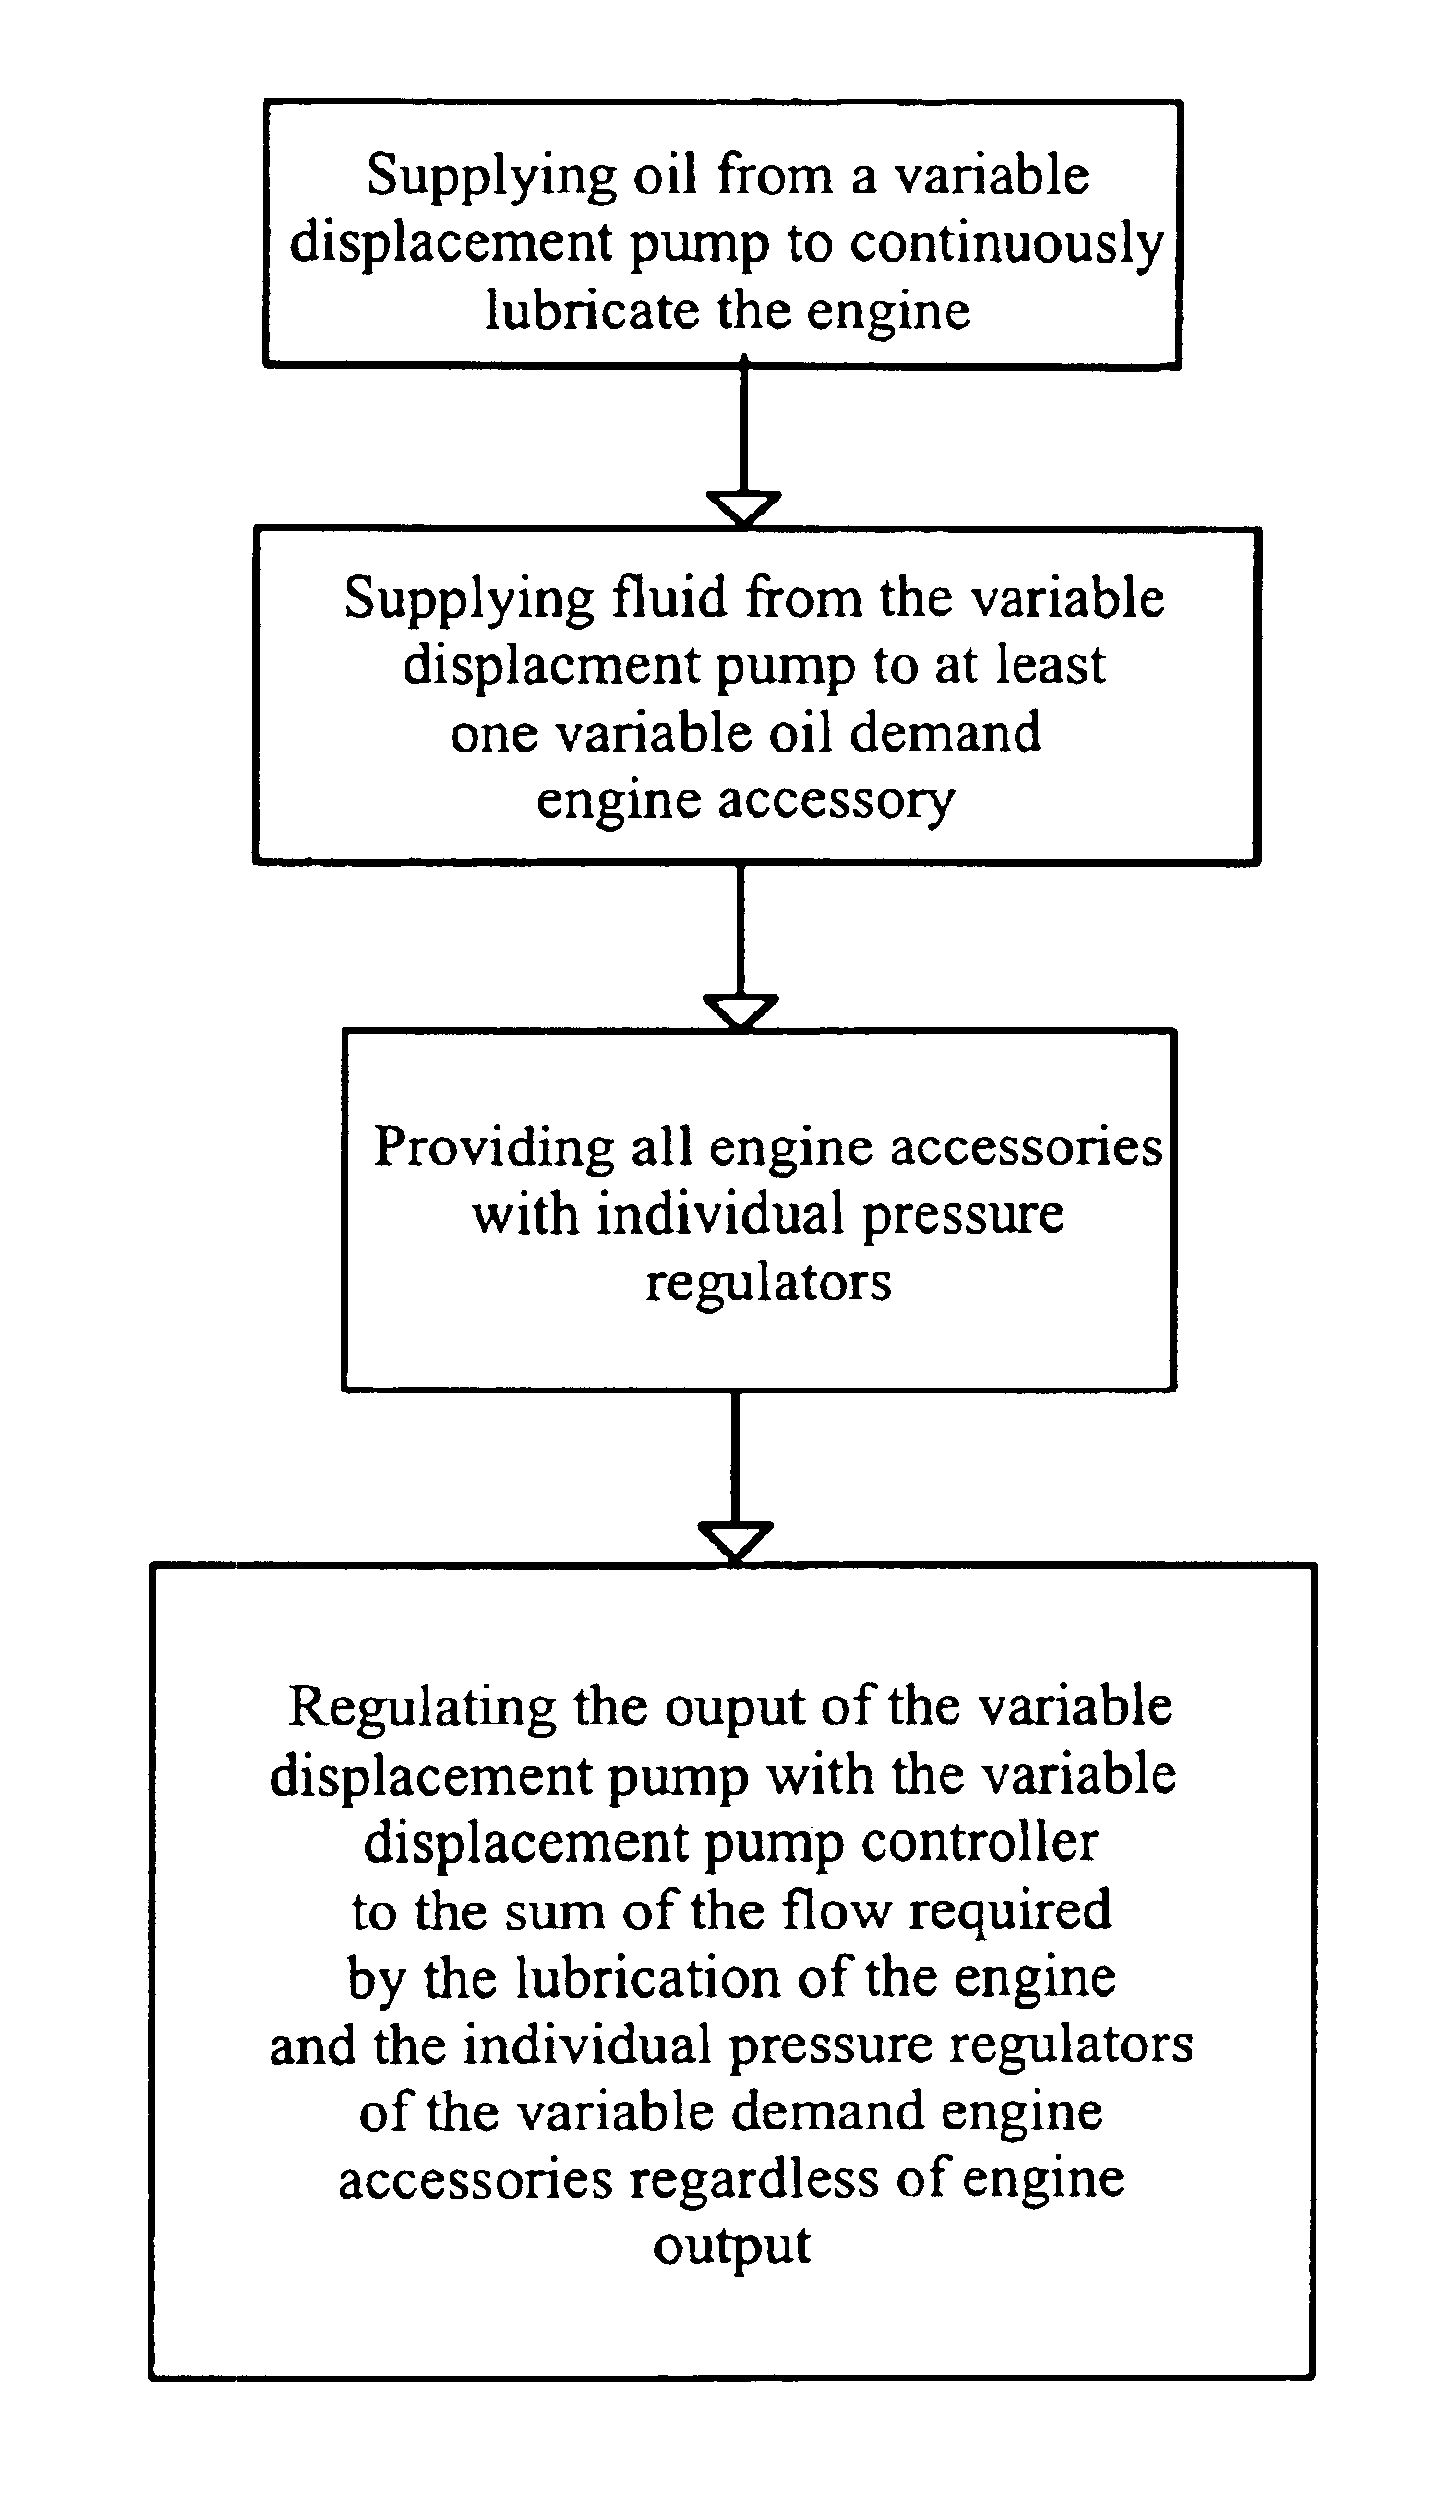 Method of providing hydraulic pressure for mechanical work from an engine lubricating system